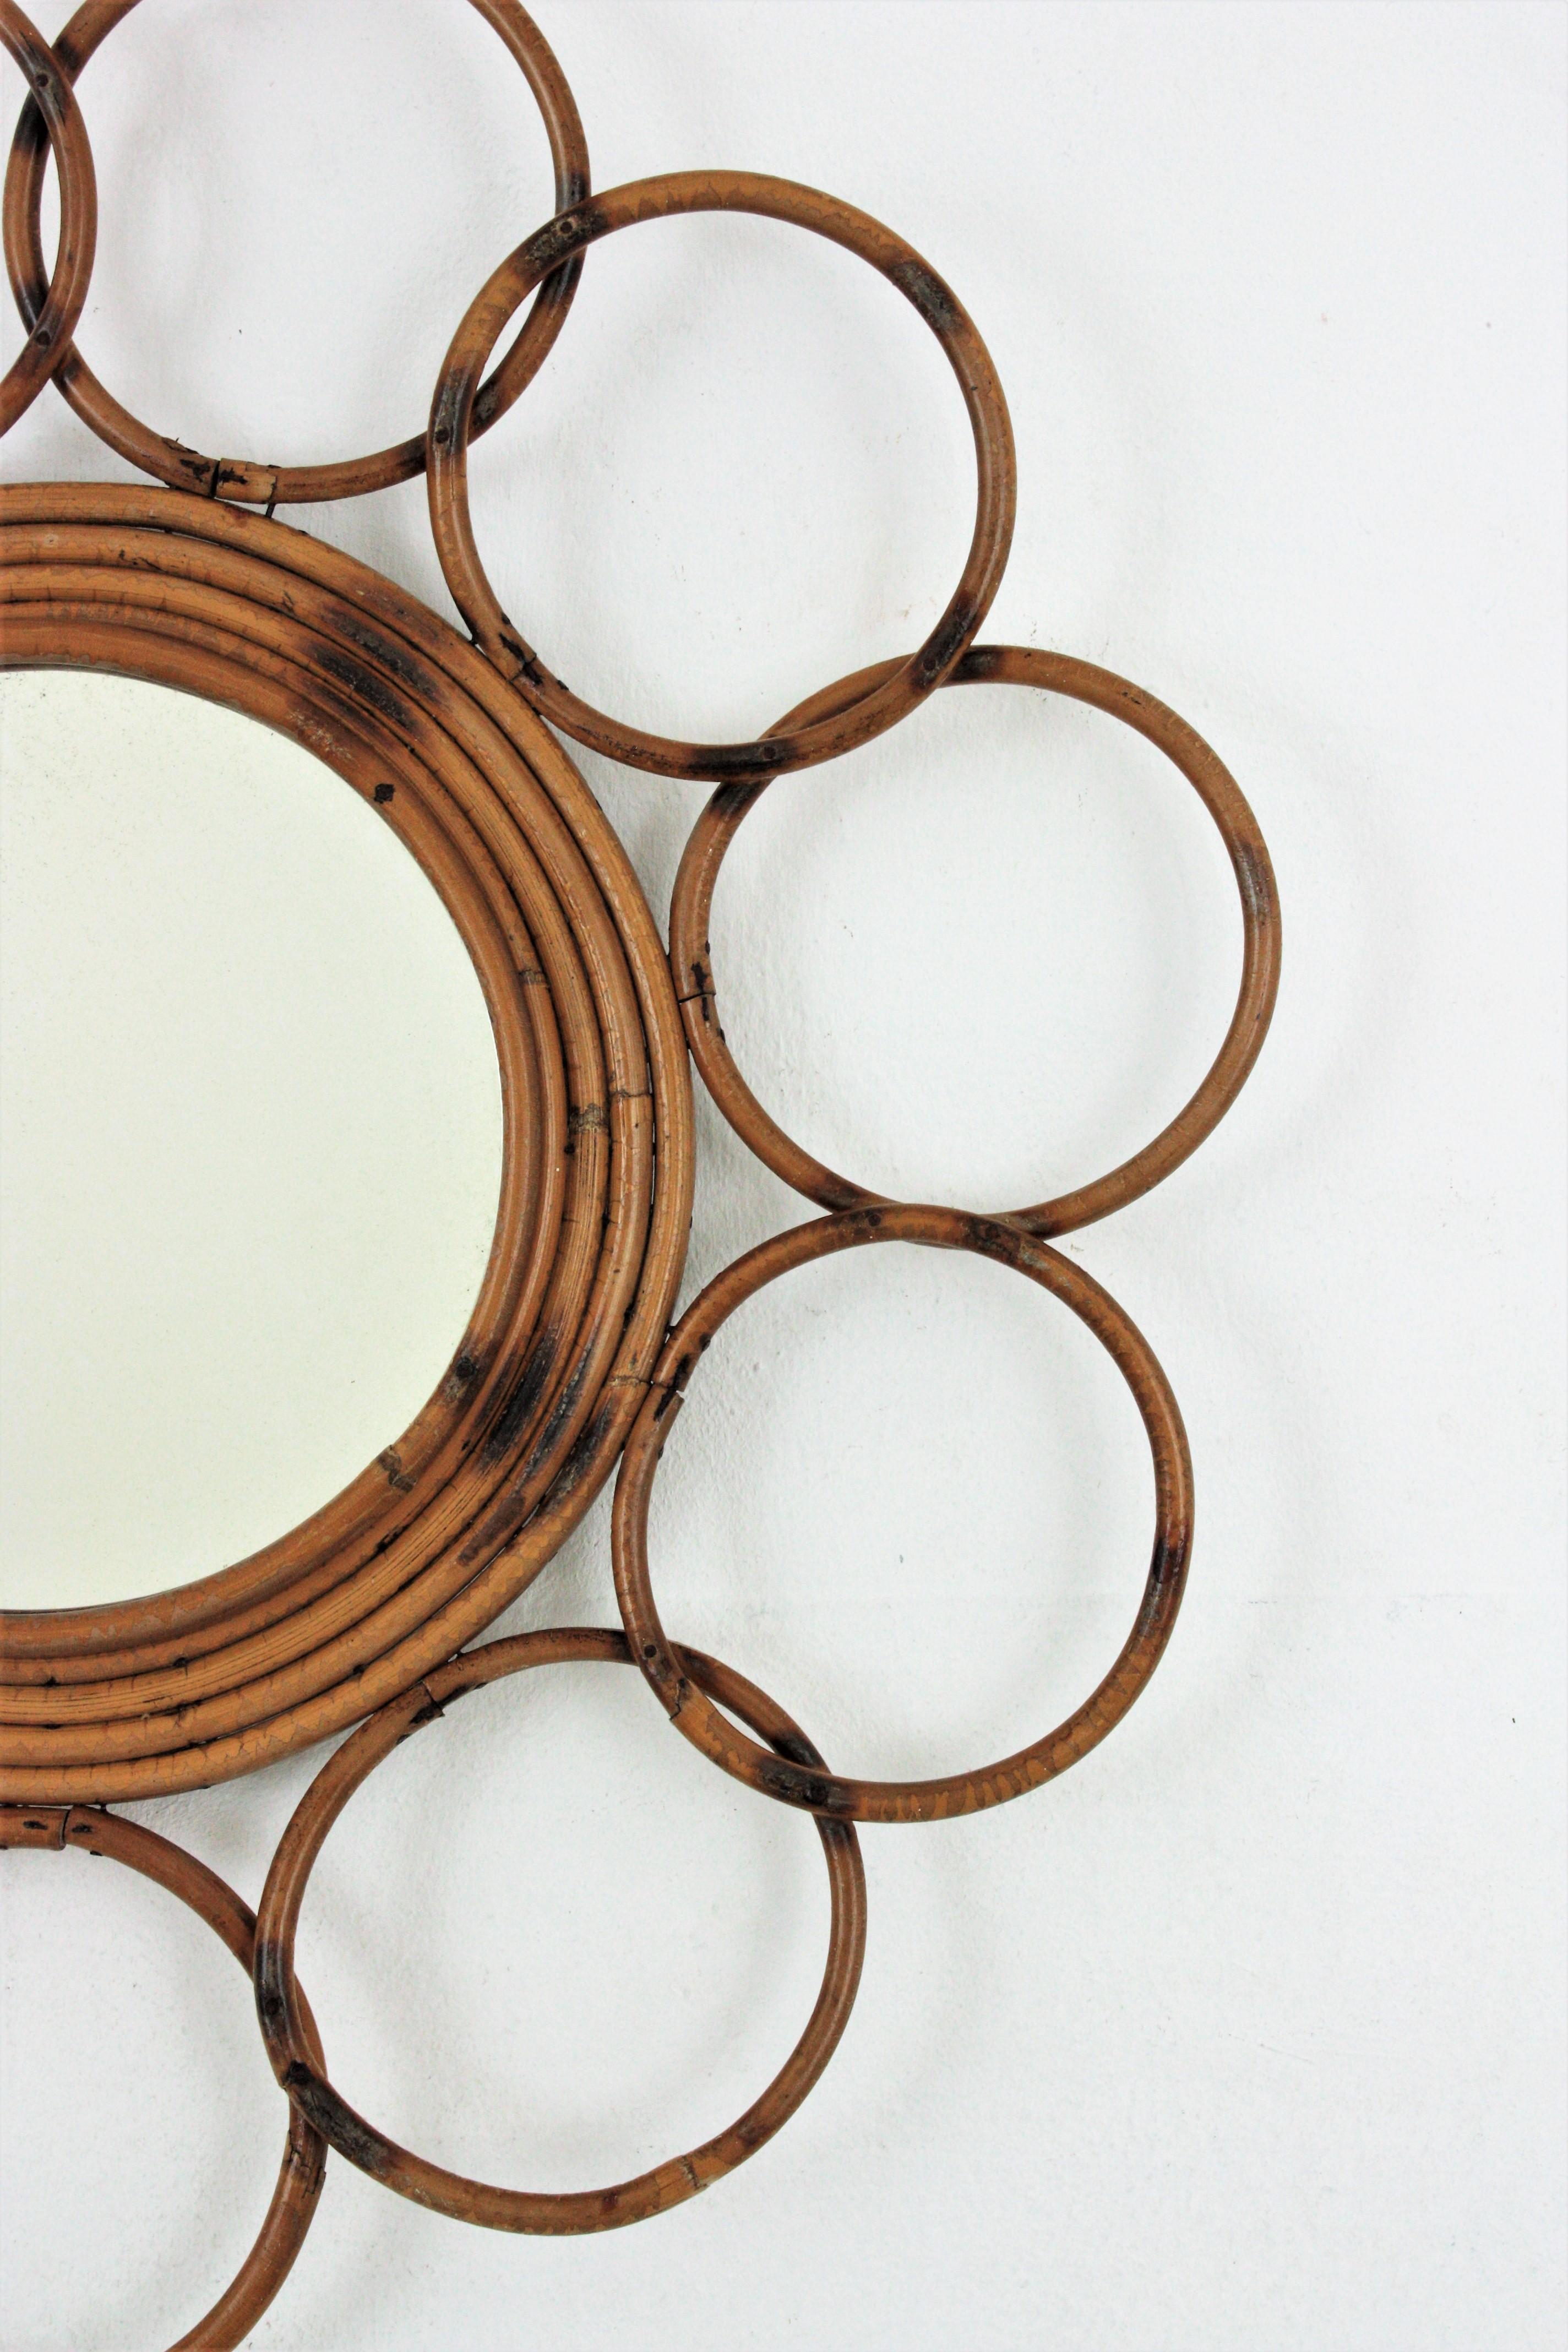 Hand-Carved Rattan French Riviera Round Flower Mirror with Rings Frame, 1960s For Sale